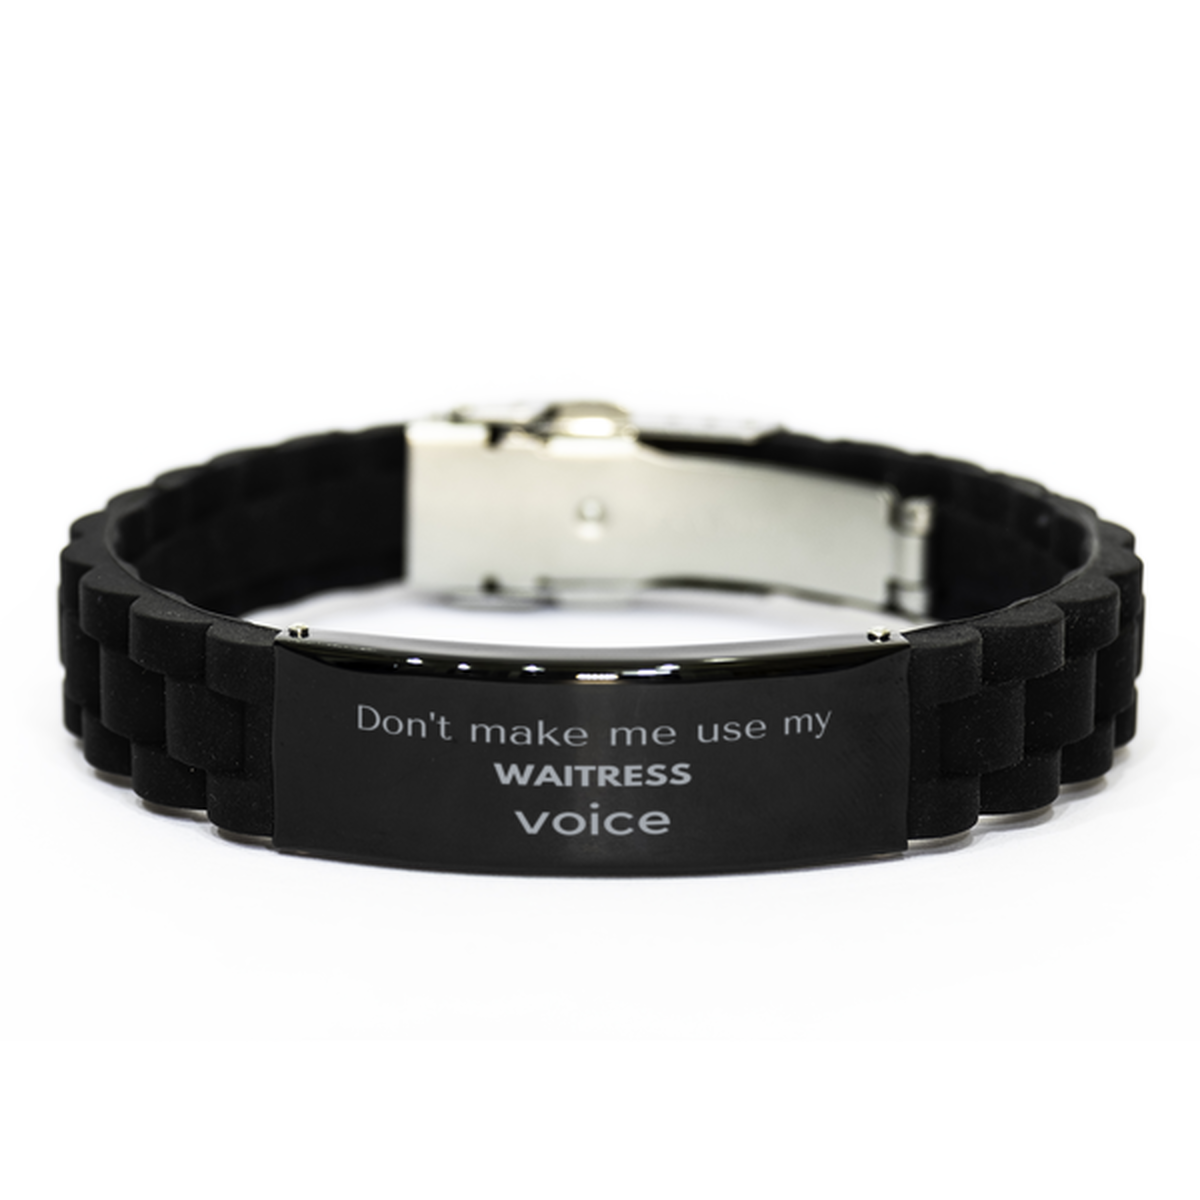 Don't make me use my Waitress voice, Sarcasm Waitress Gifts, Christmas Waitress Black Glidelock Clasp Bracelet Birthday Unique Gifts For Waitress Coworkers, Men, Women, Colleague, Friends